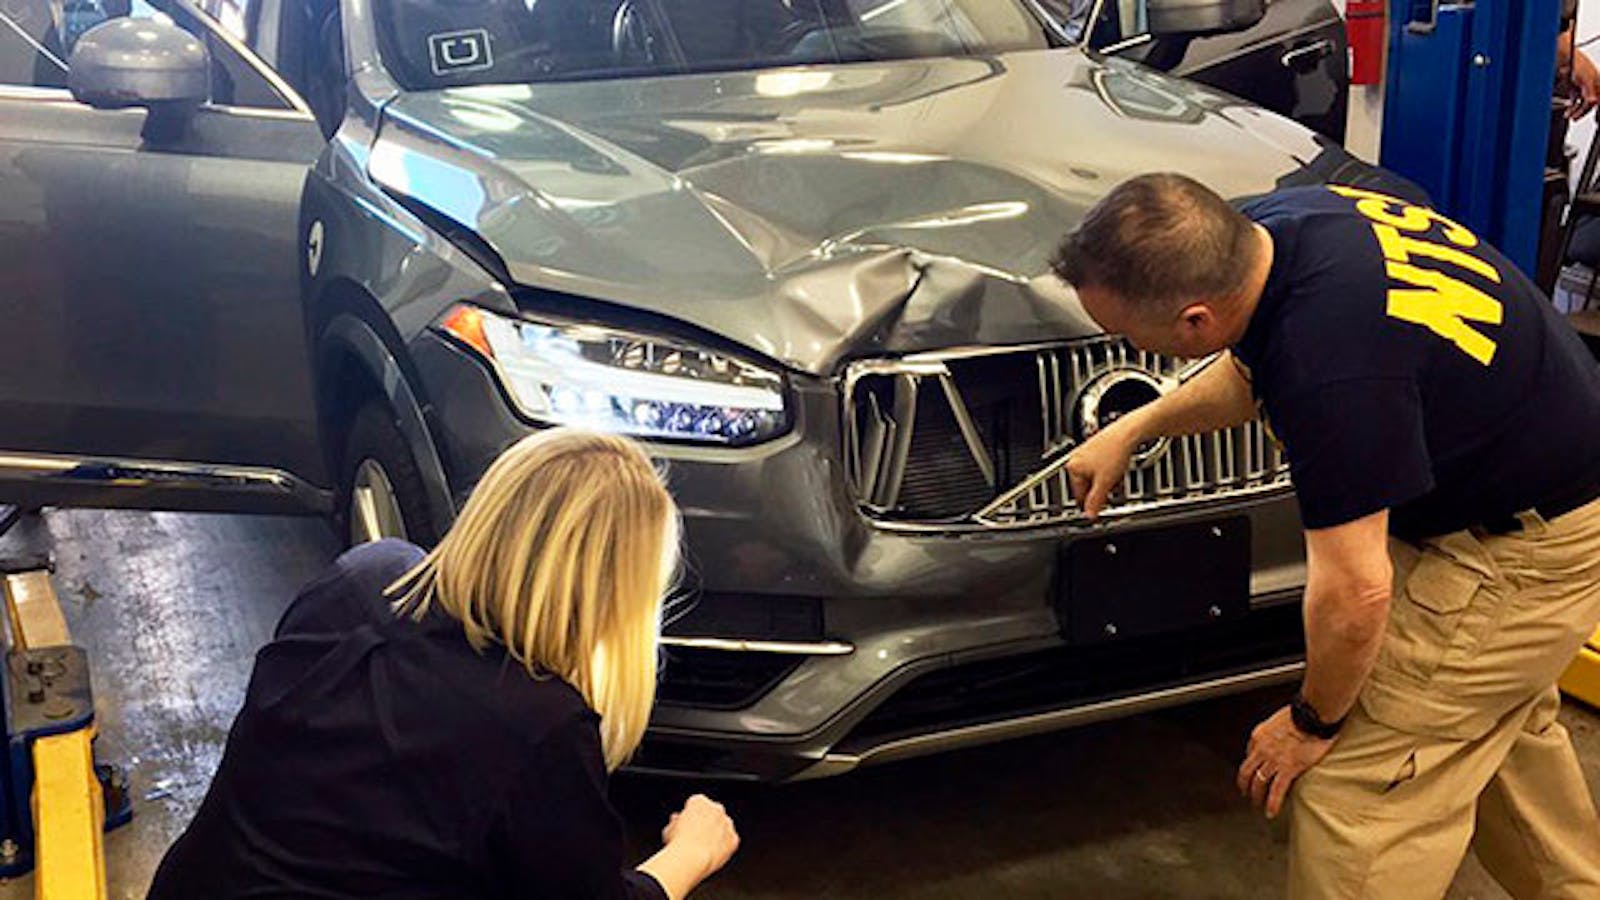 Investigators examined a self-driving Uber vehicle that fatally struck a woman in Tempe, Ariz., in March. Photo: AP